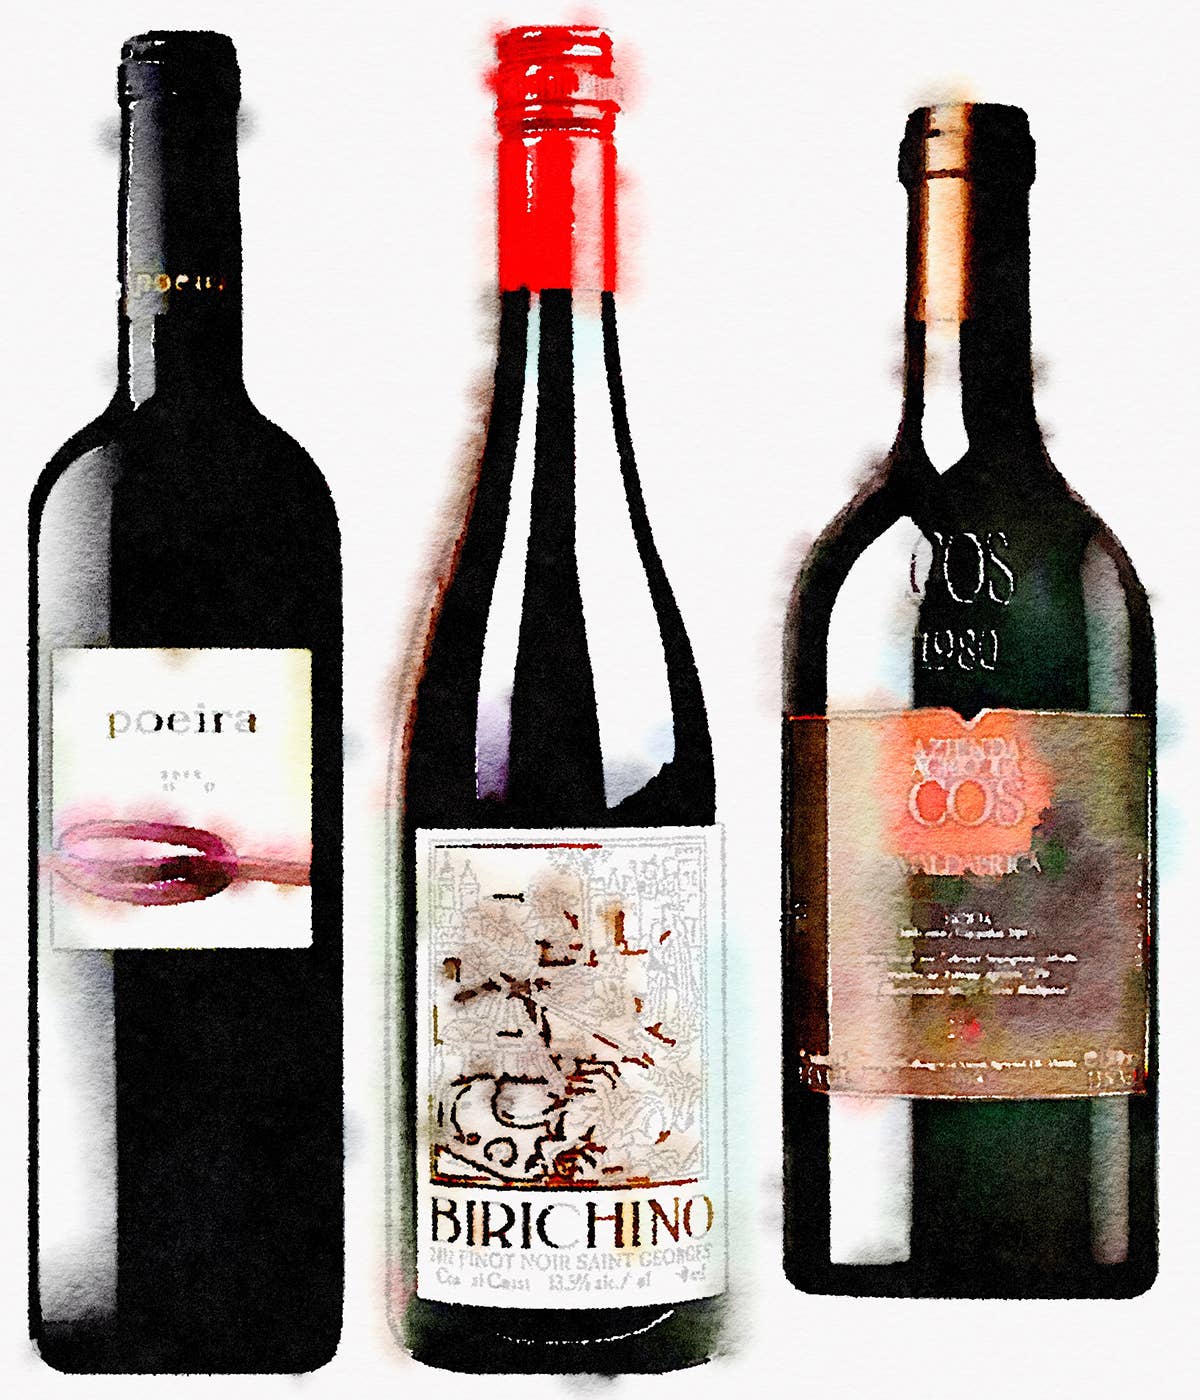 For Valentine’s Day, Wines Made with Love